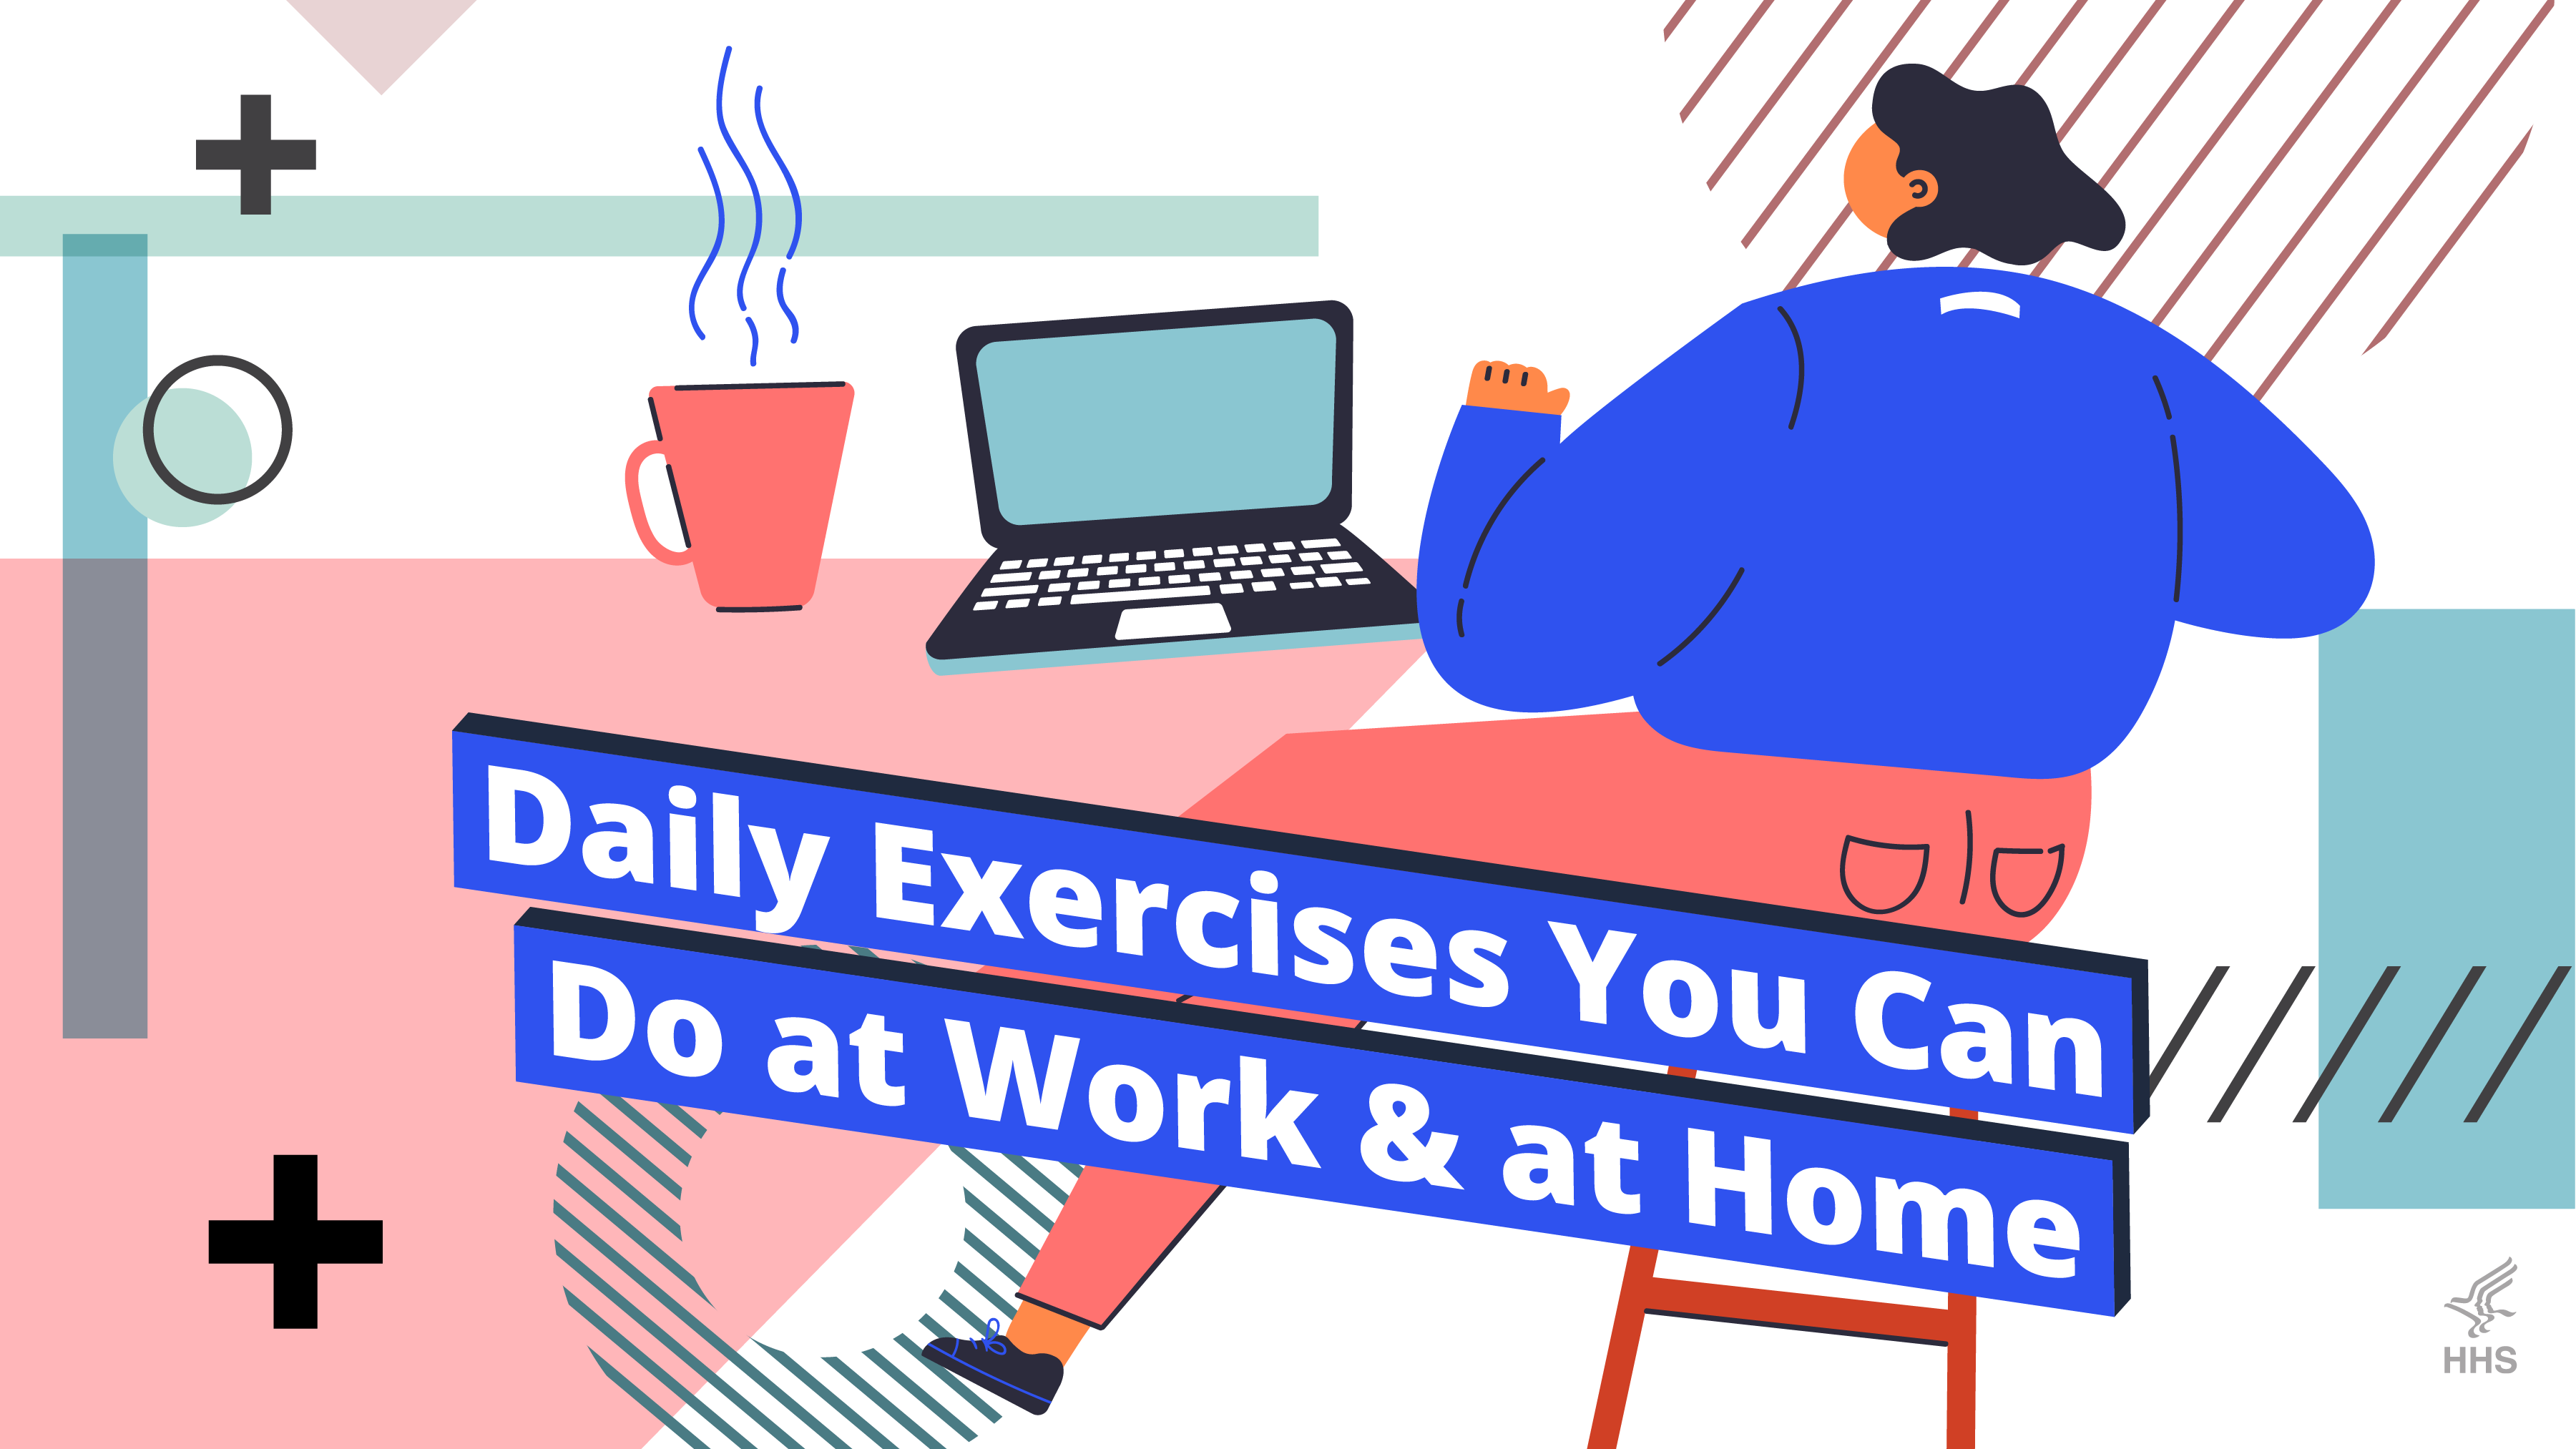 Daily Exercises You Can Do at Work & at Home